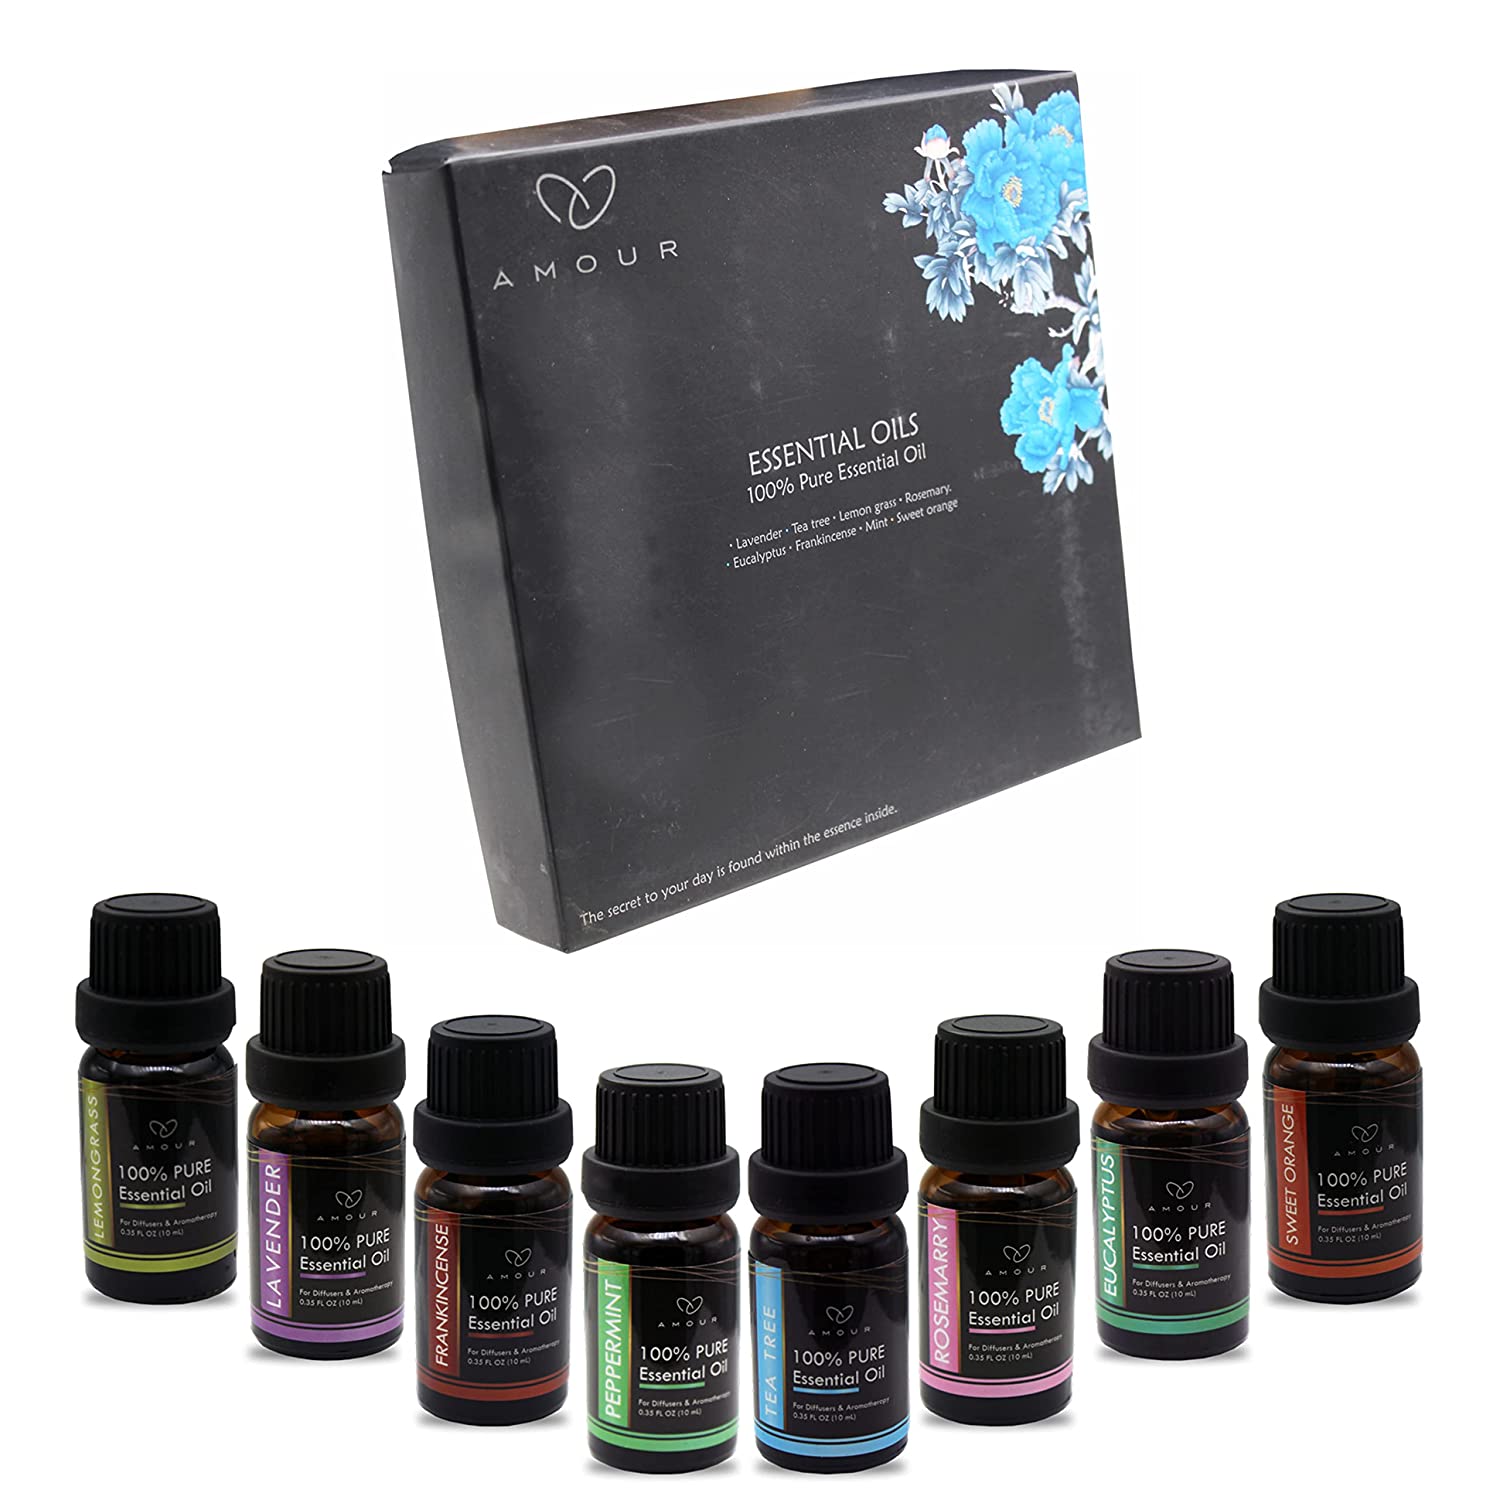 Amour 8 Piece Essential Oil Set, Top Essential Oils For Aromatherapy Diffuser With Gift Packing